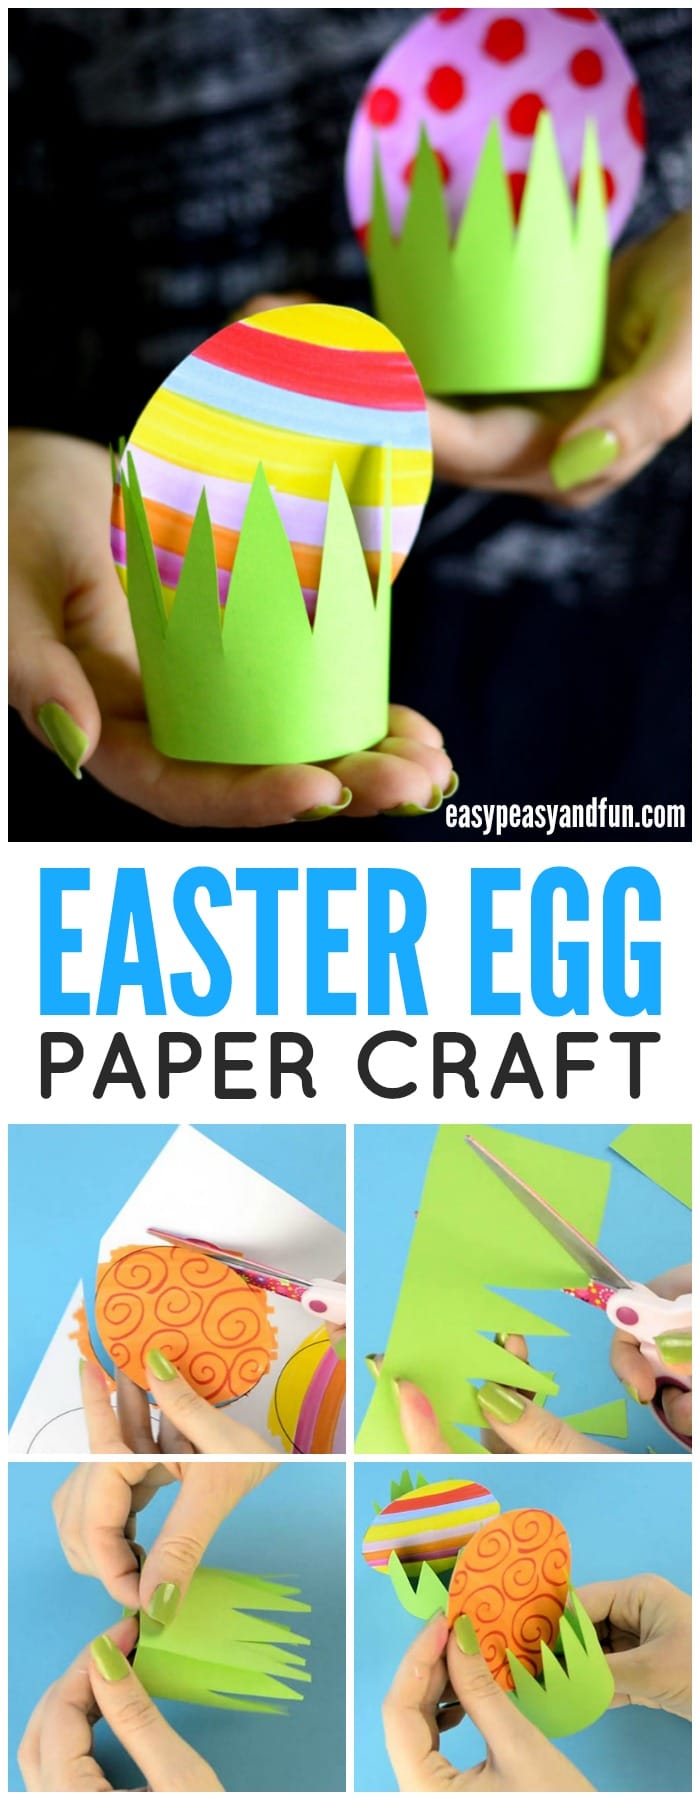 Cute Paper Easter Egg Craft for Kids to Make